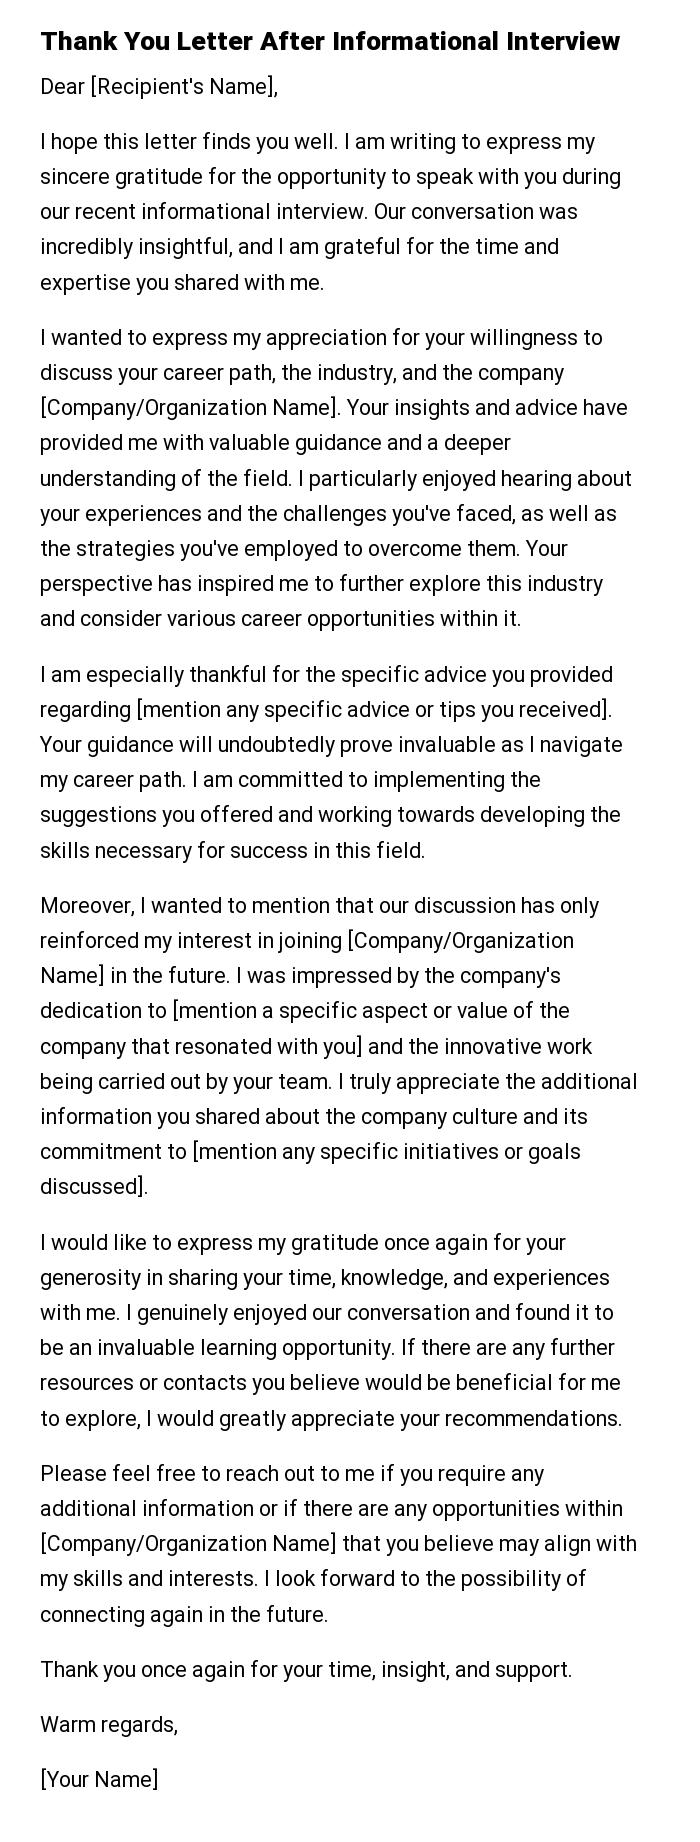 Thank You Letter After Informational Interview